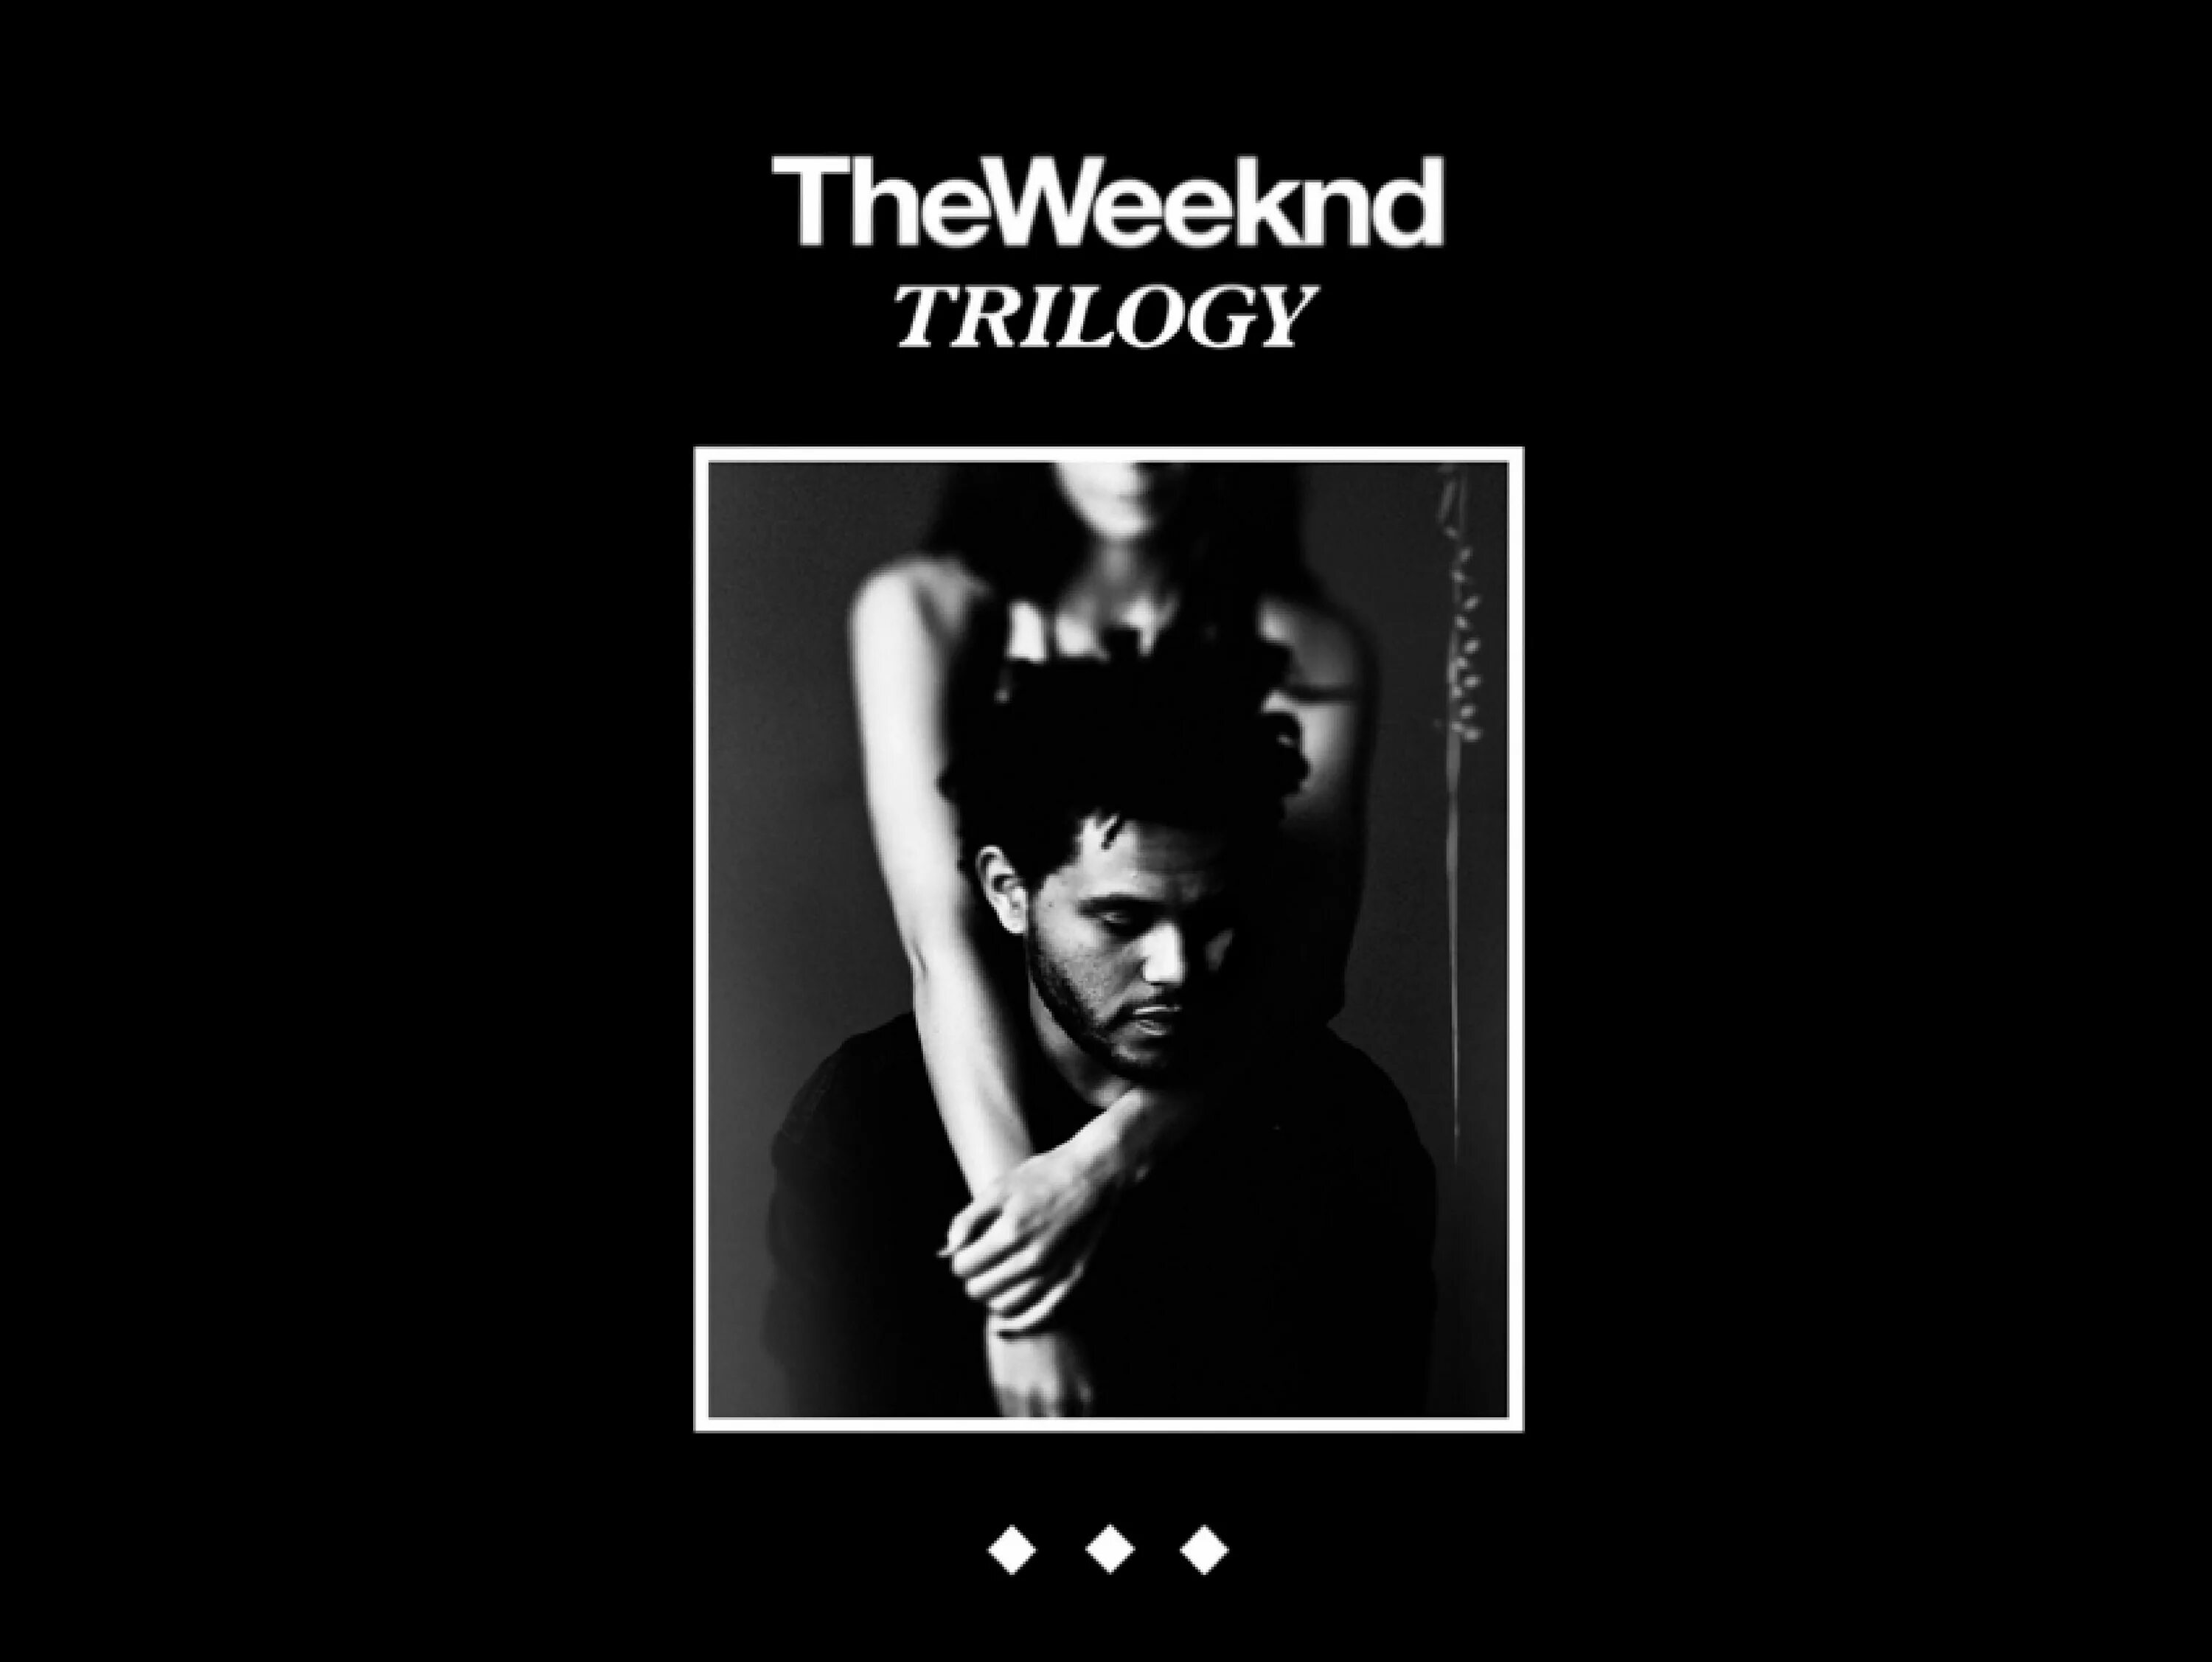 The Weeknd обложка. The Weeknd Trilogy. The Weeknd Trilogy обложка. The Weeknd twenty eight.